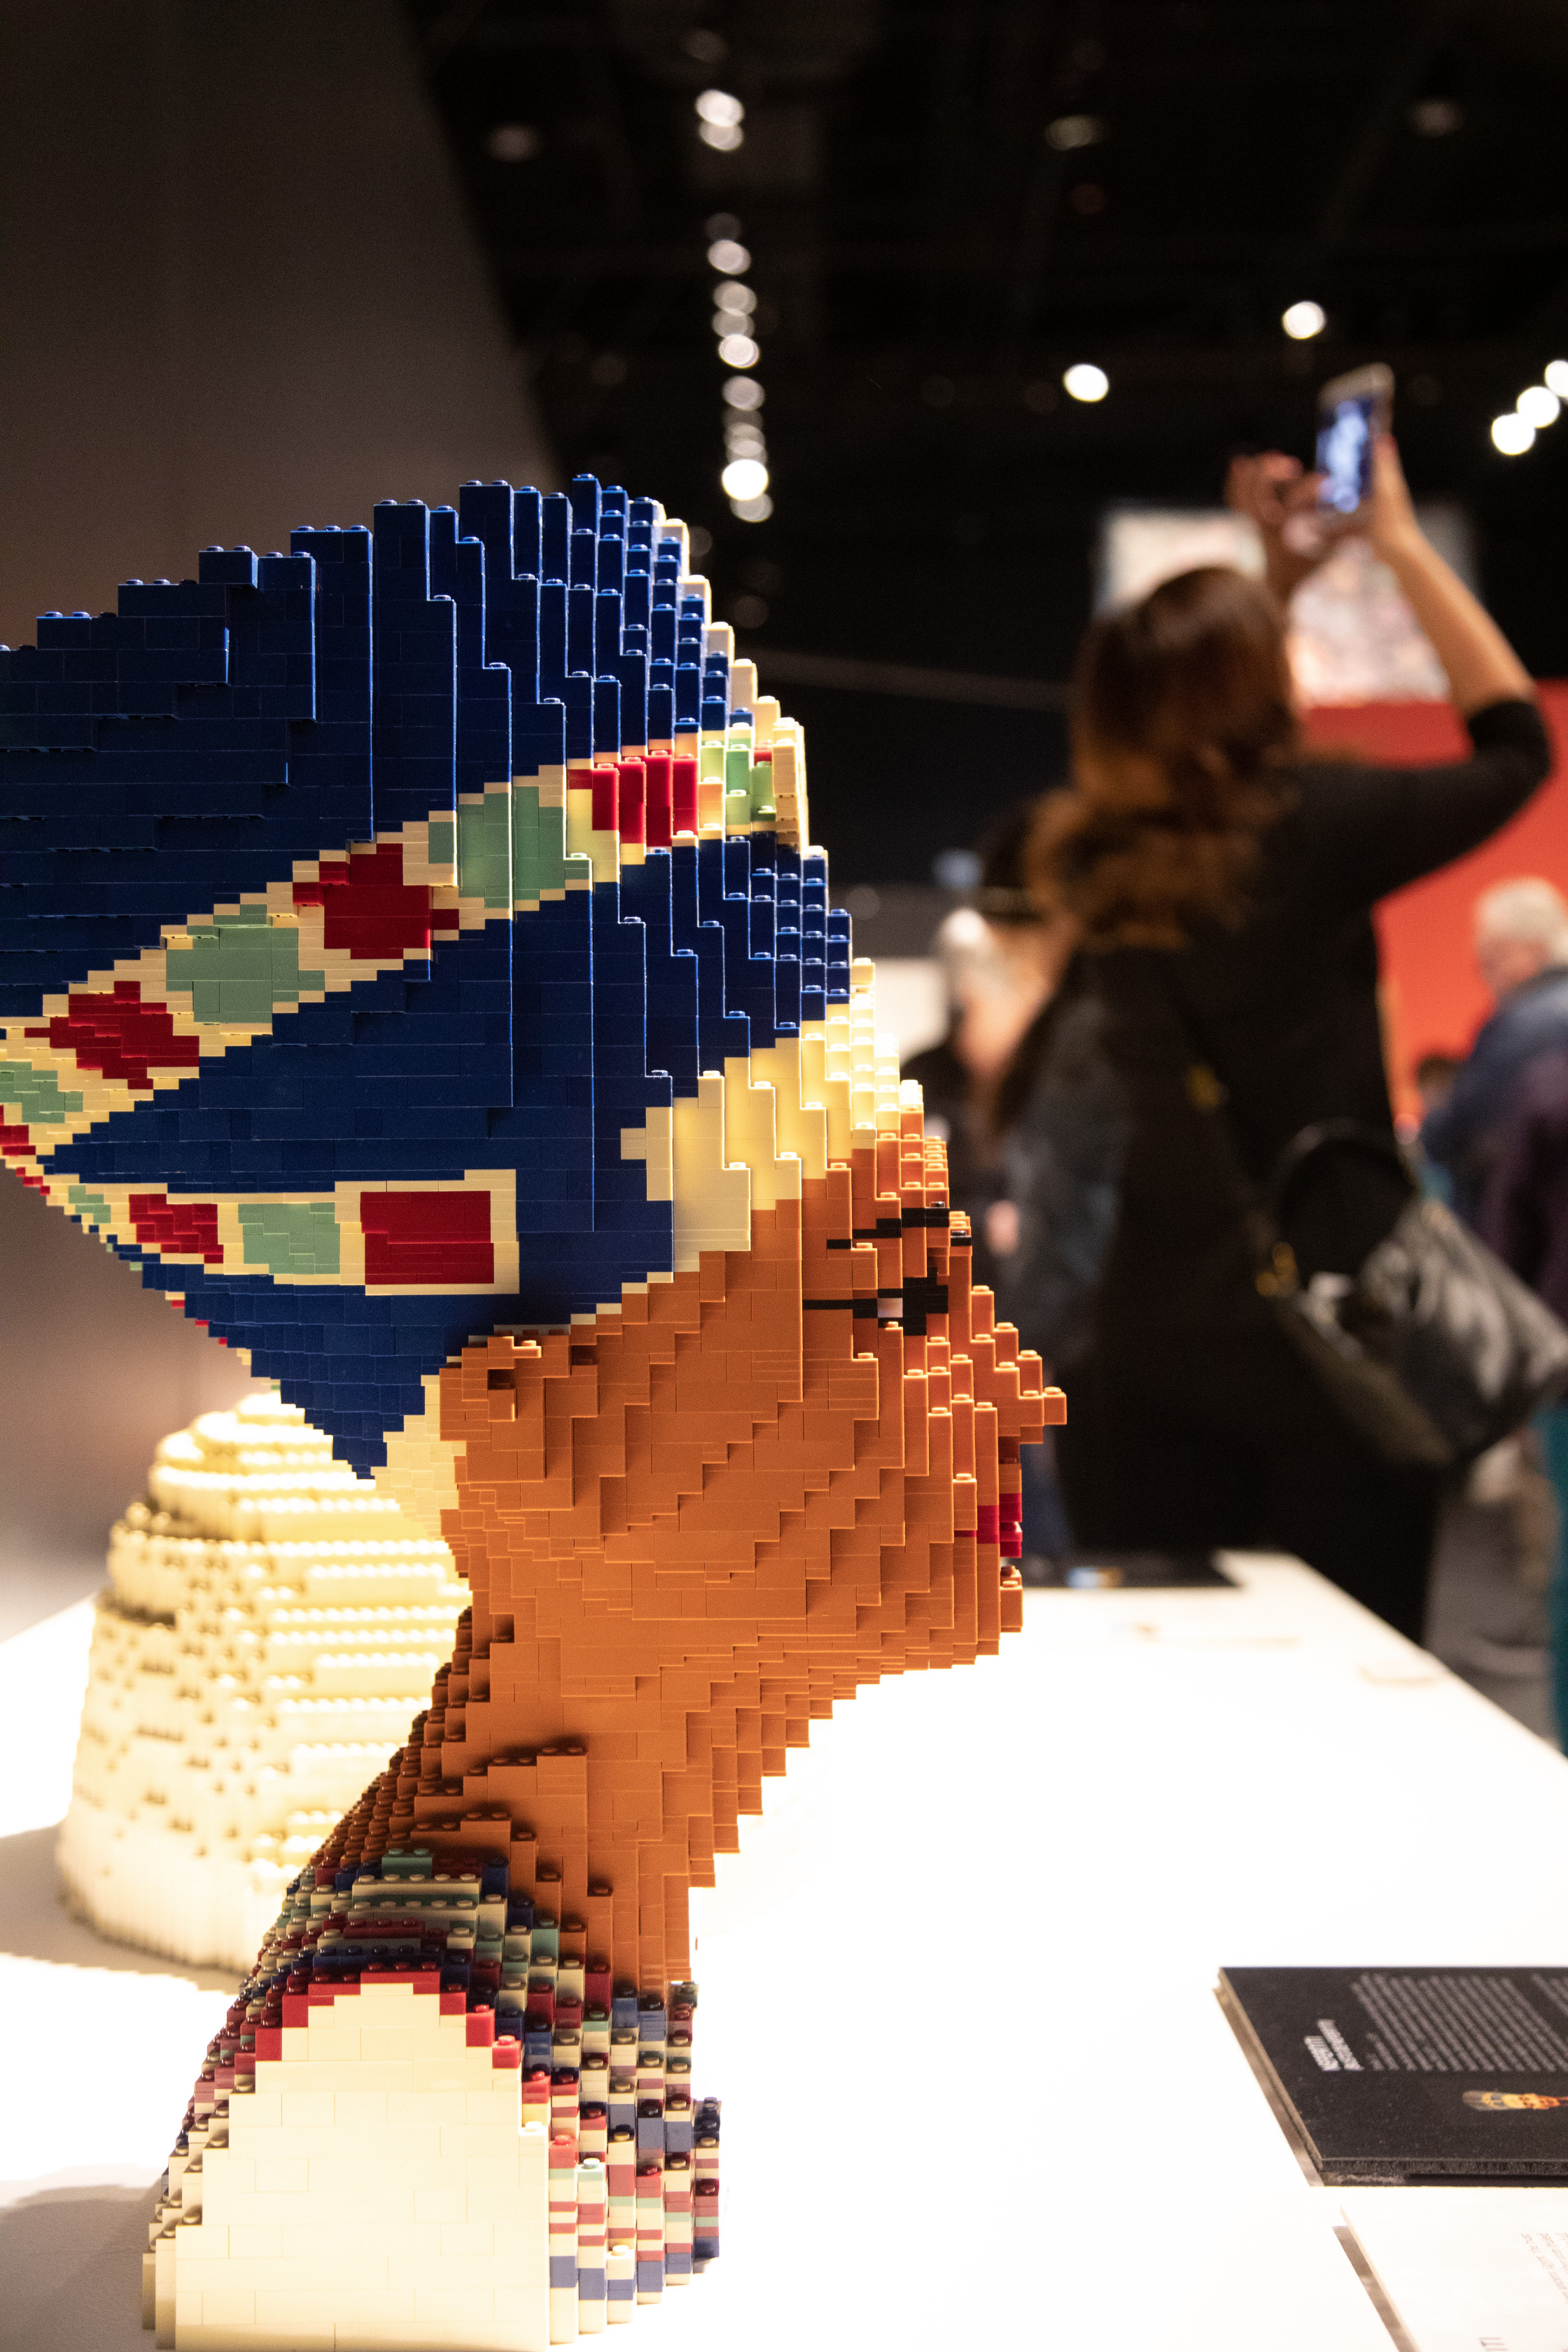 Nefertiti sculpture is one of many recreated art masterpieces featured in The Art of the Brick traveling exhibition (PHOTO CREDIT: JerSean Golatt/Perot Museum of Nature and Science)